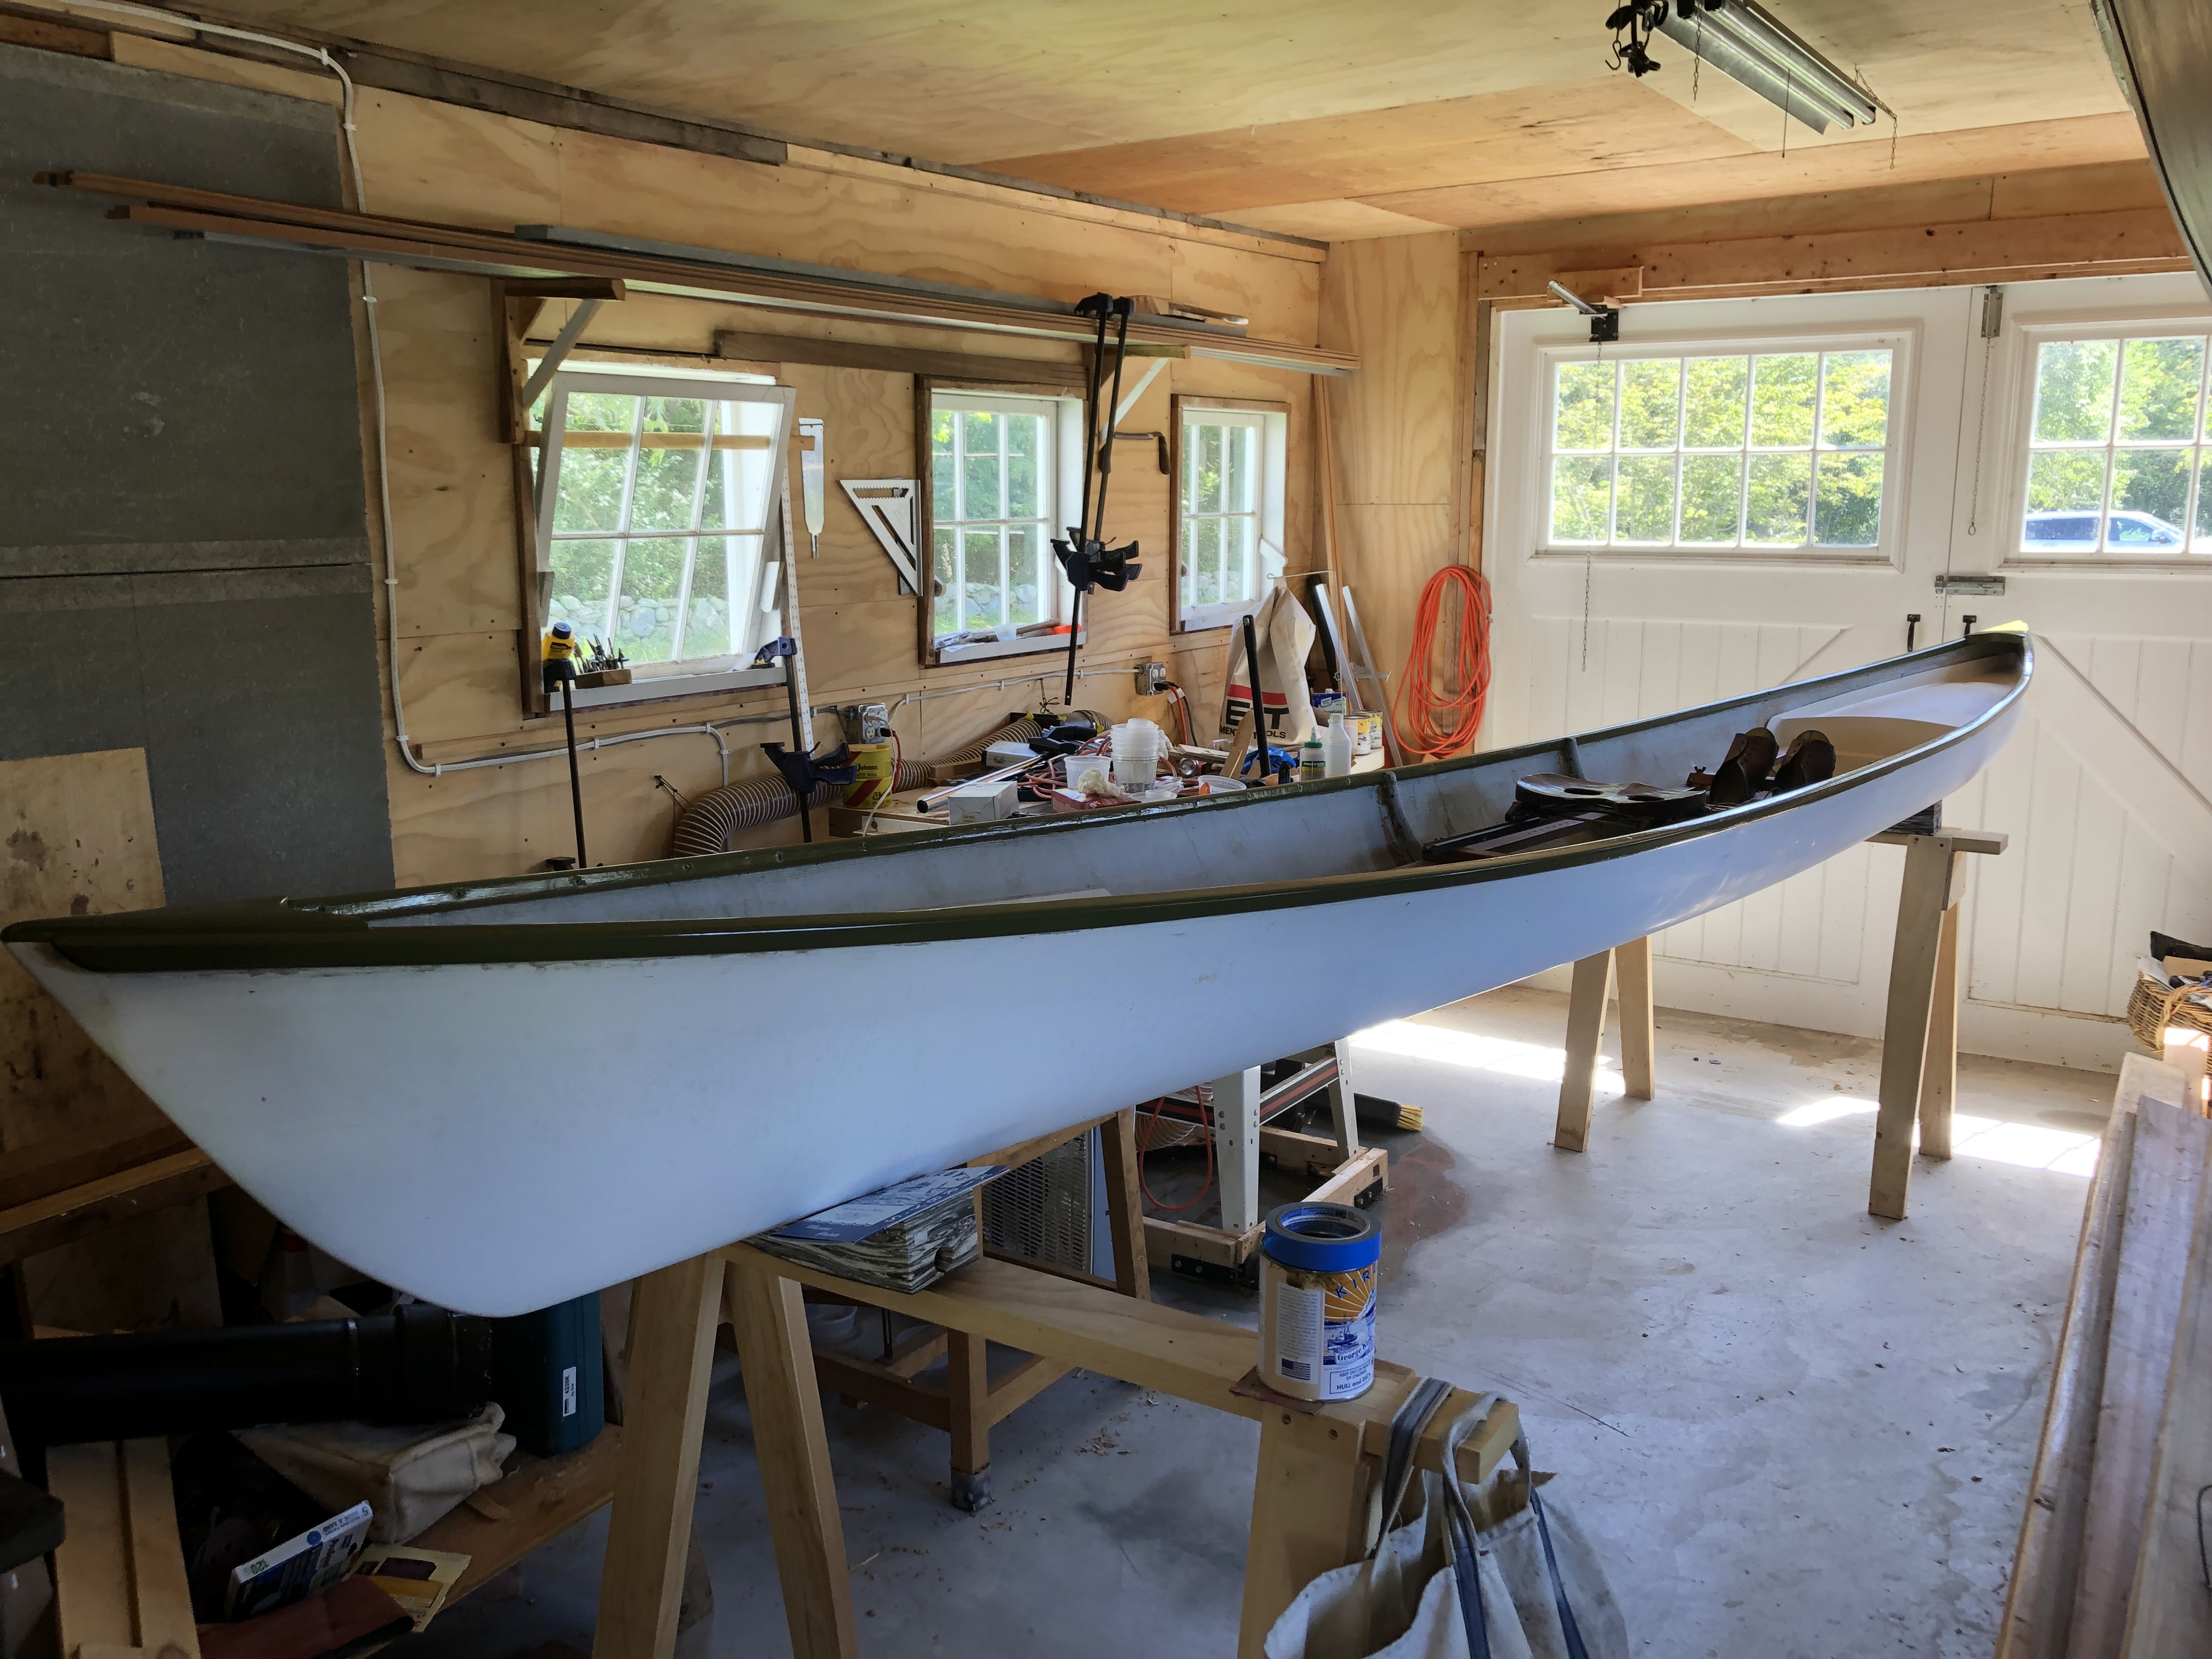 restored single person row boat with sliding seat in shop